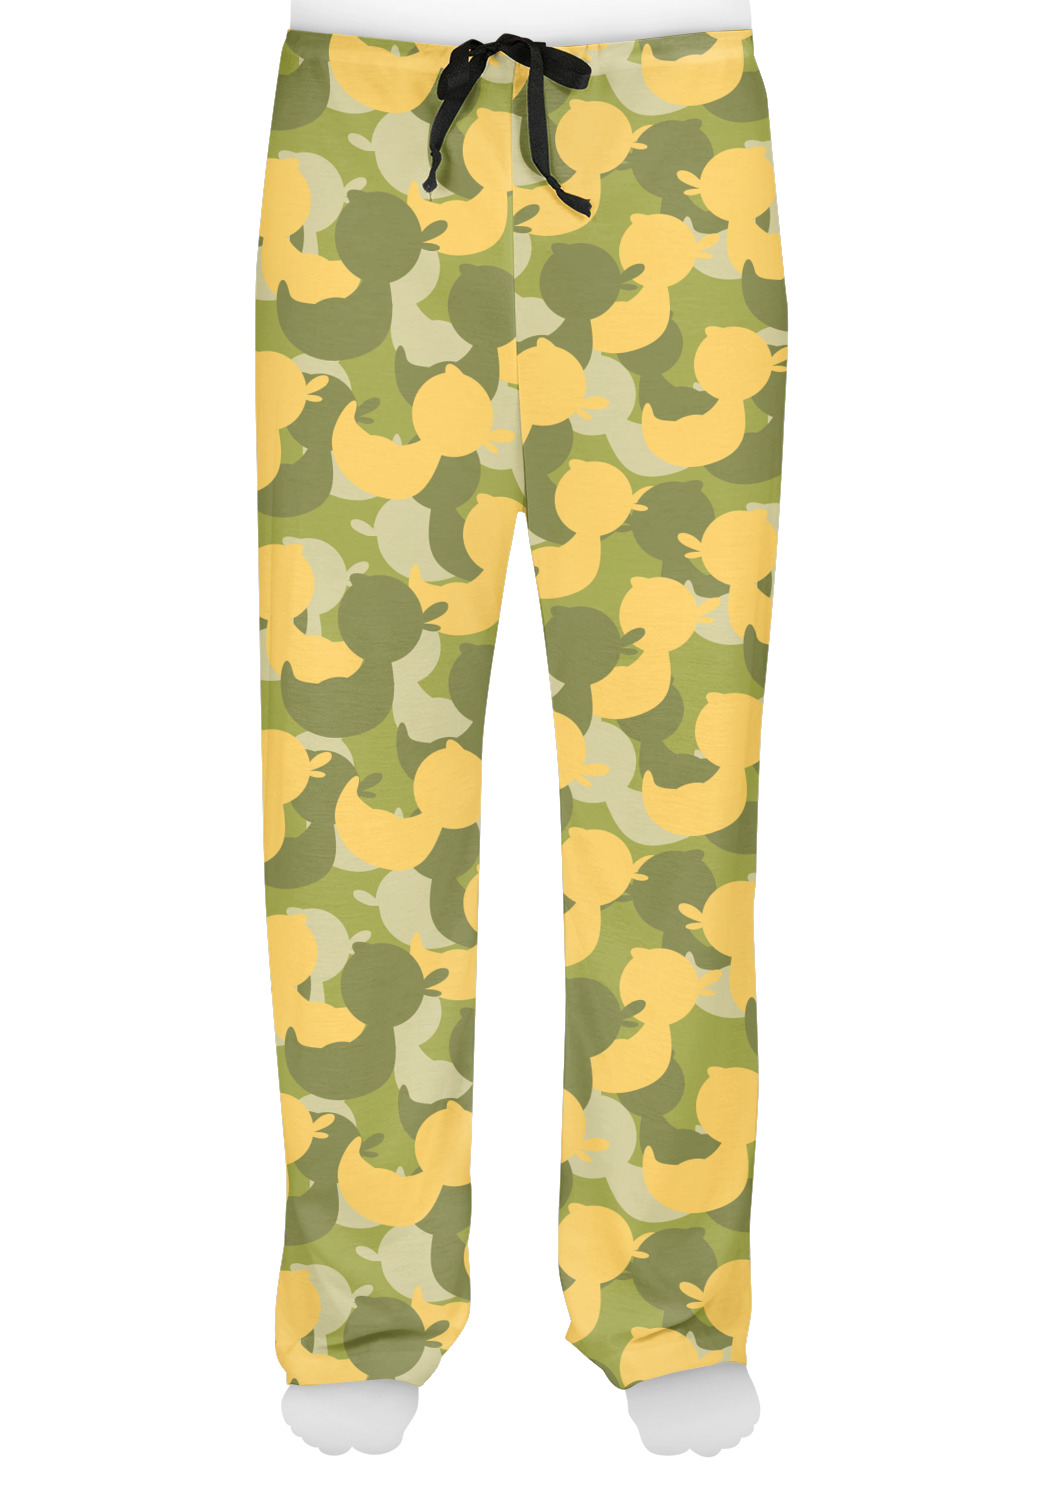 Rubber Duckie Camo Mens Pajama Pants (Personalized) - YouCustomizeIt